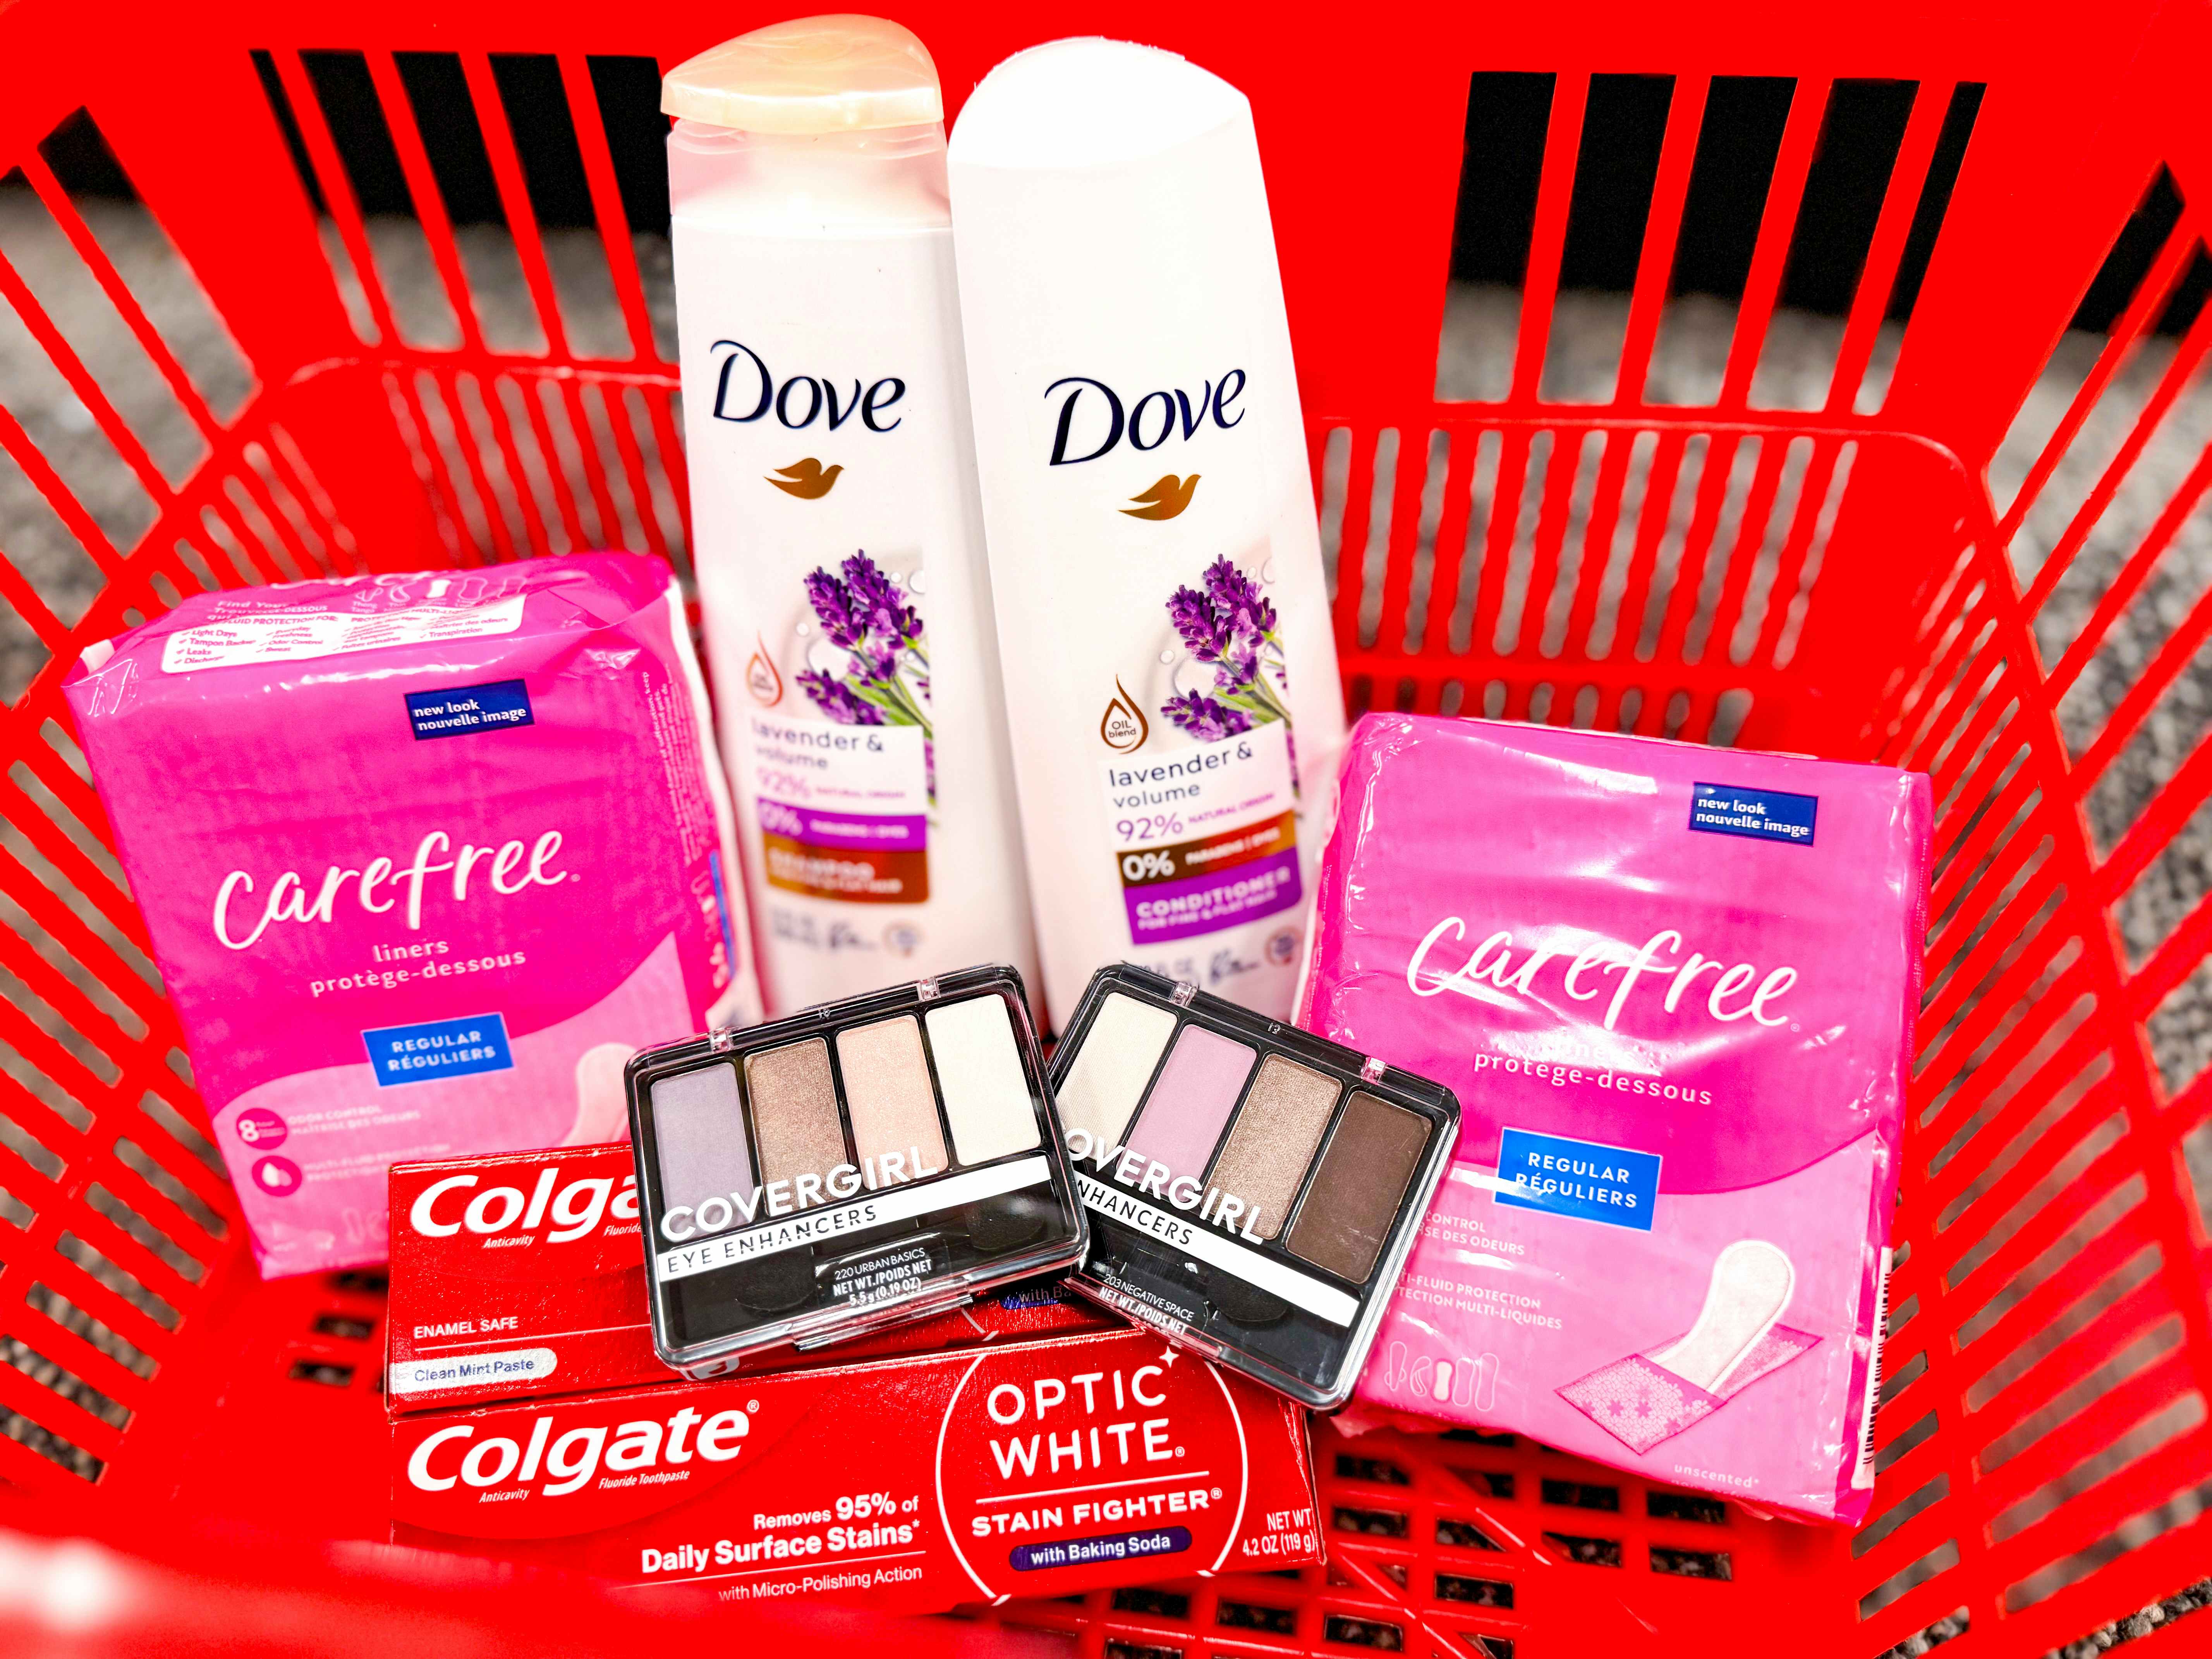 Free CVS Shopping Haul: Dove, Colgate, Covergirl, and Carefree ($35 Value)